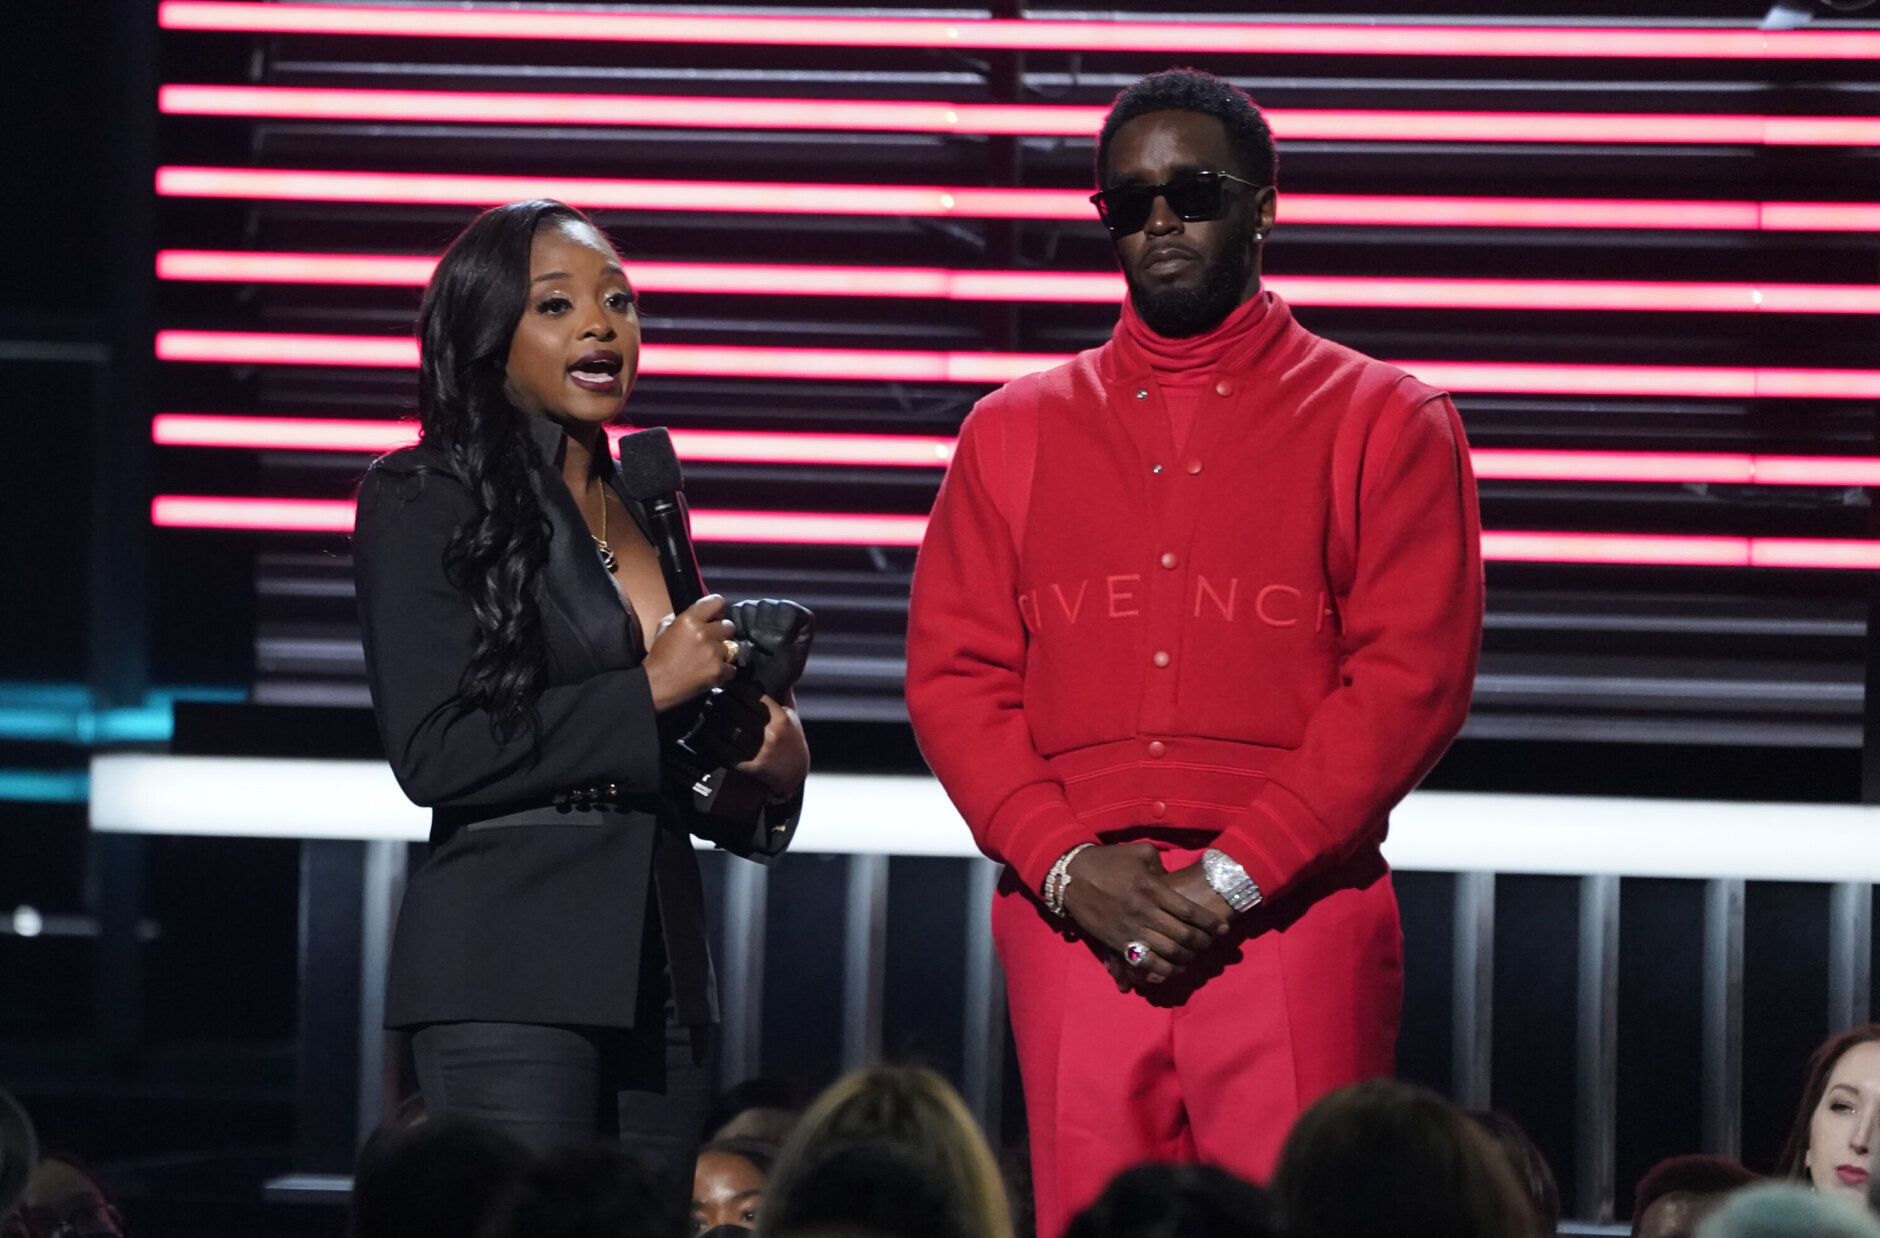 Sean "Diddy" Combs, right, presents the revolt black excellence award to social justice activist Tamika Mallory at the Billboard Music Awards on Sunday, May 15, 2022, at the MGM Grand Garden Arena in Las Vegas. (AP Photo/Chris Pizzello)